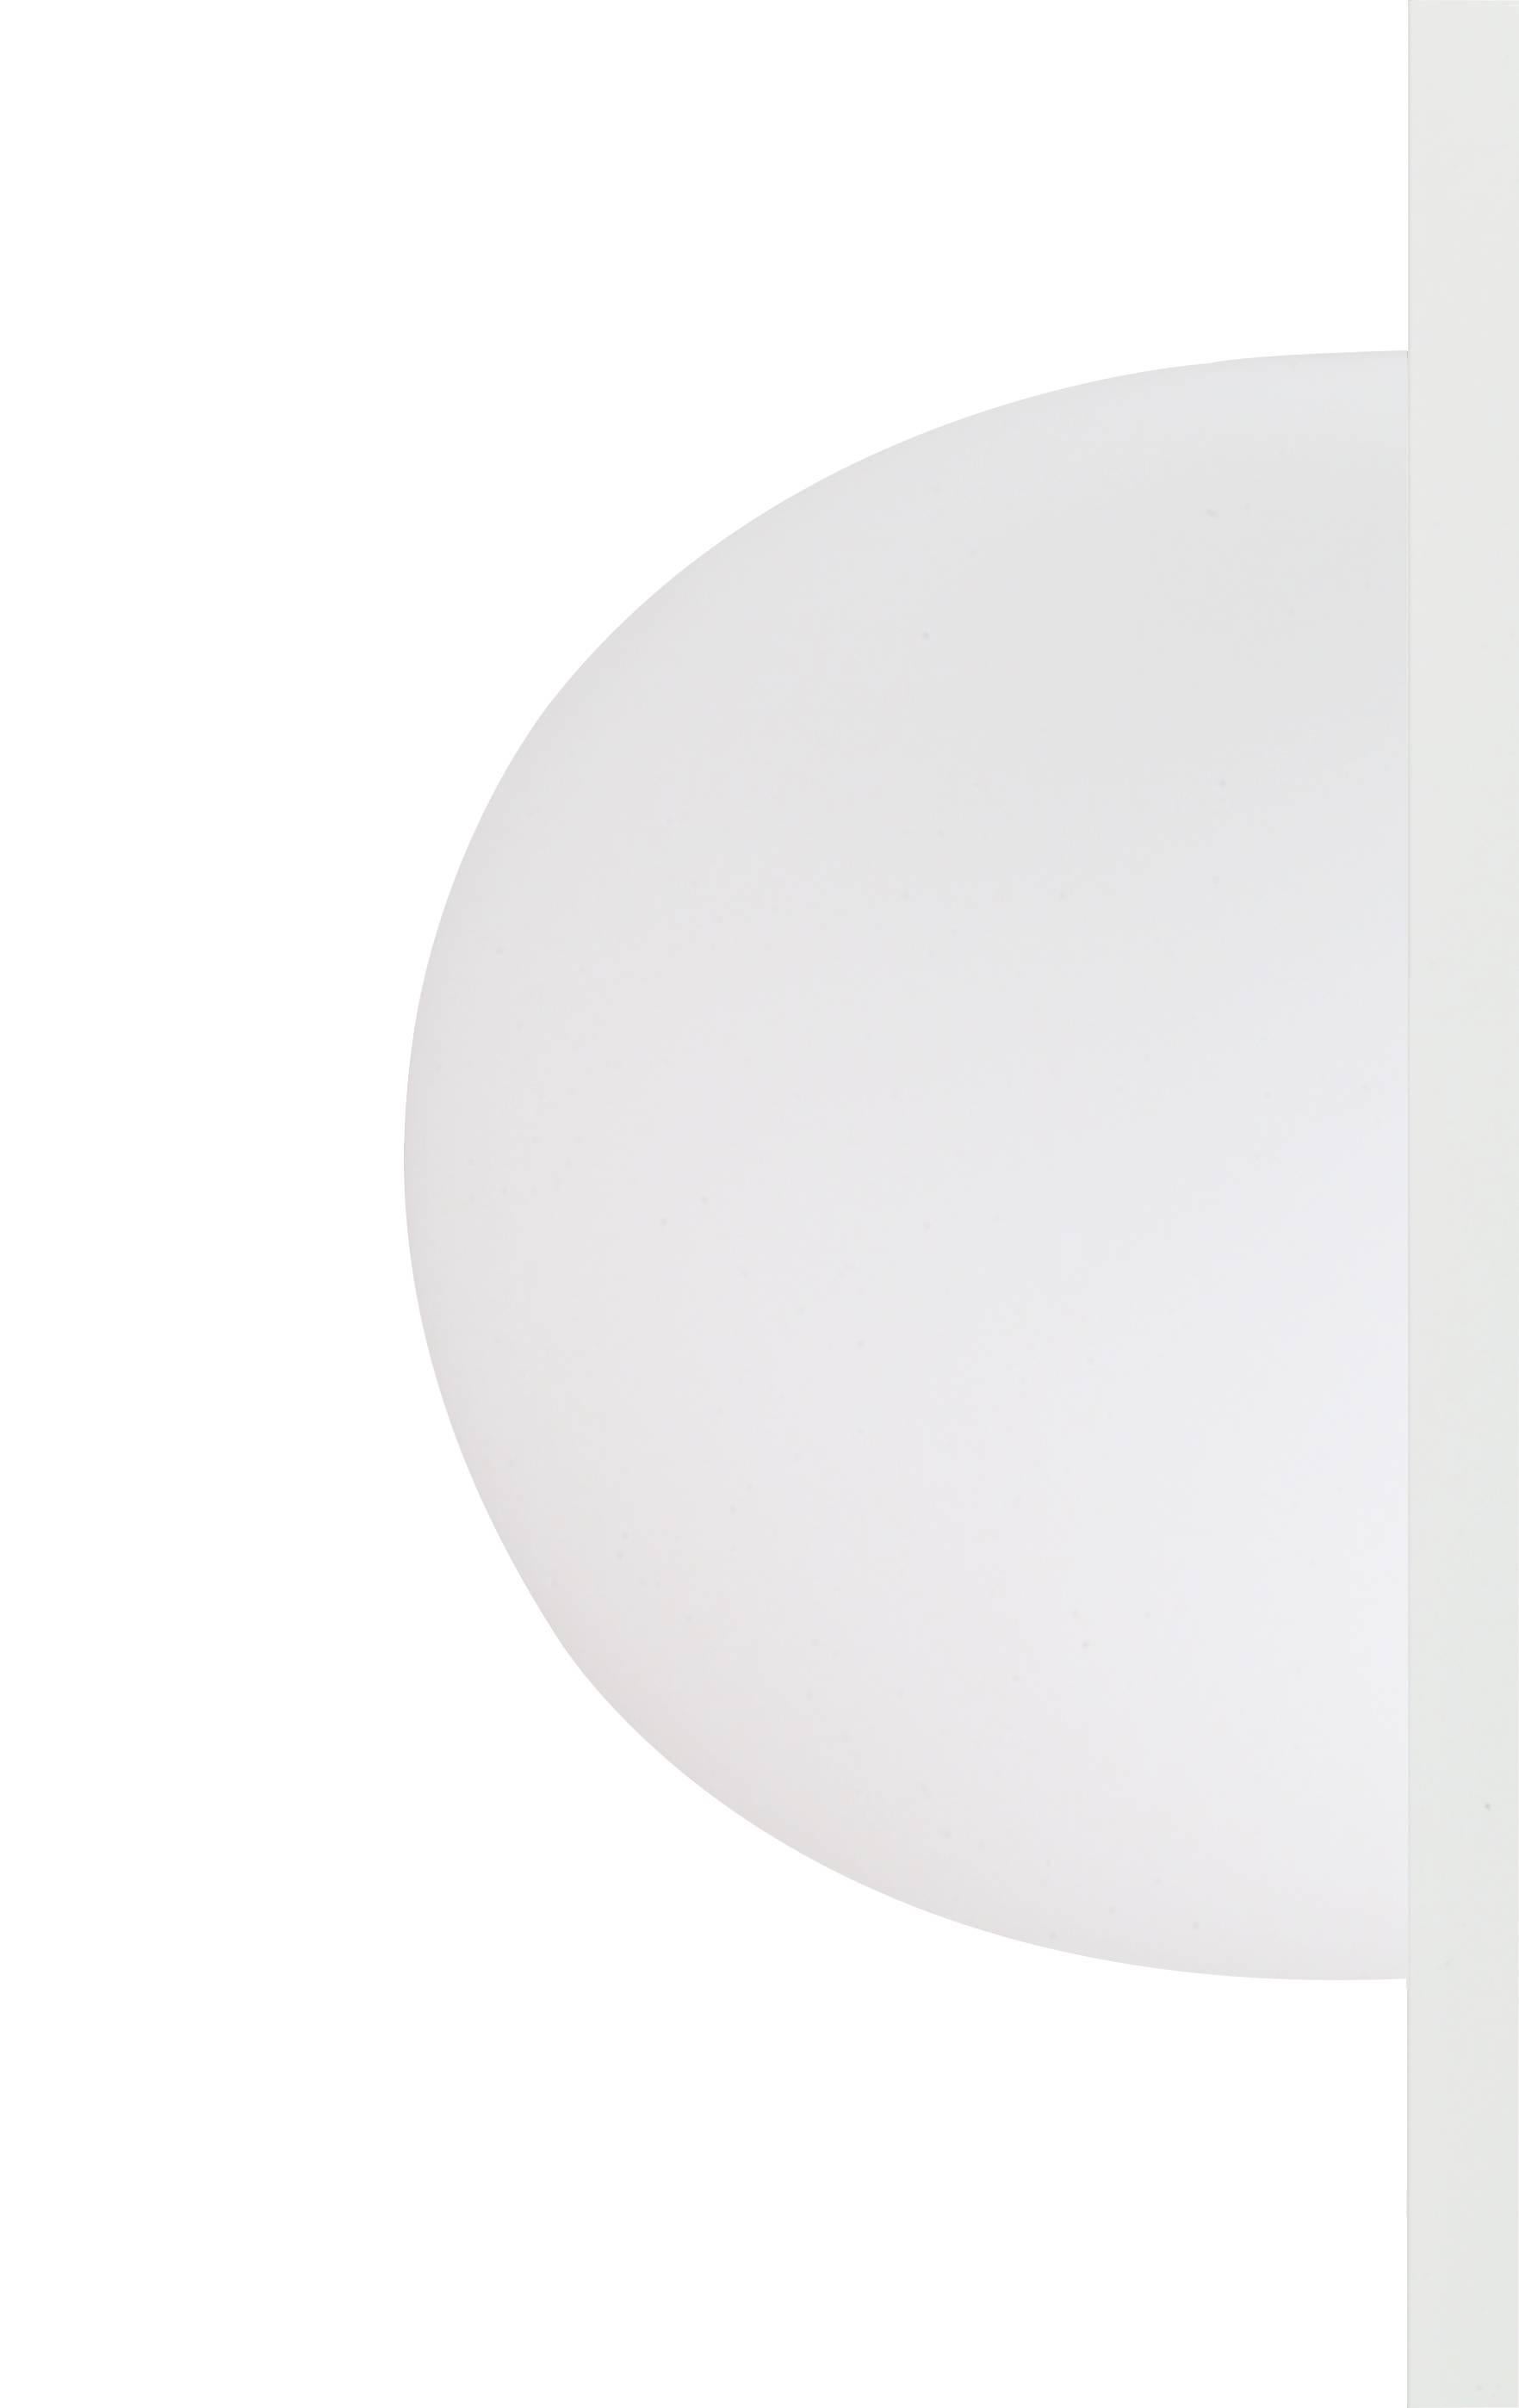 FLOS Glo-Ball Wall Lamp by Jasper Morrison
Part of the popular Glo Ball Series, the Glo Ball W wall sconce was created by artist Jasper Morrison. Its shape invokes the radiant calm of a full moon. The Glo Ball W’s diffuser is made of externally